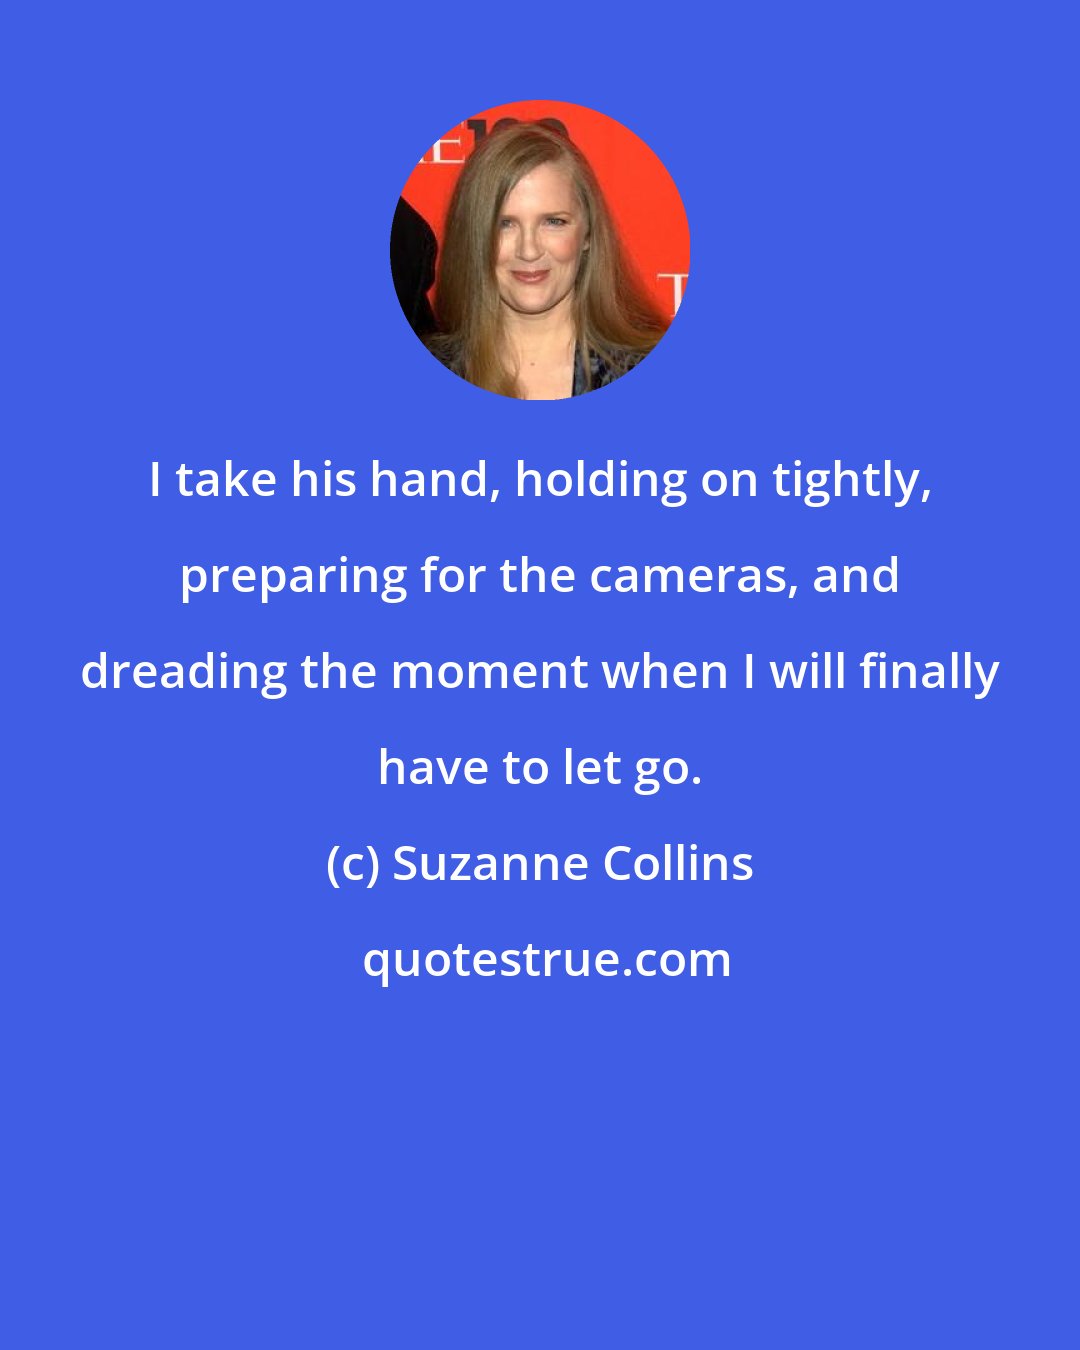 Suzanne Collins: I take his hand, holding on tightly, preparing for the cameras, and dreading the moment when I will finally have to let go.